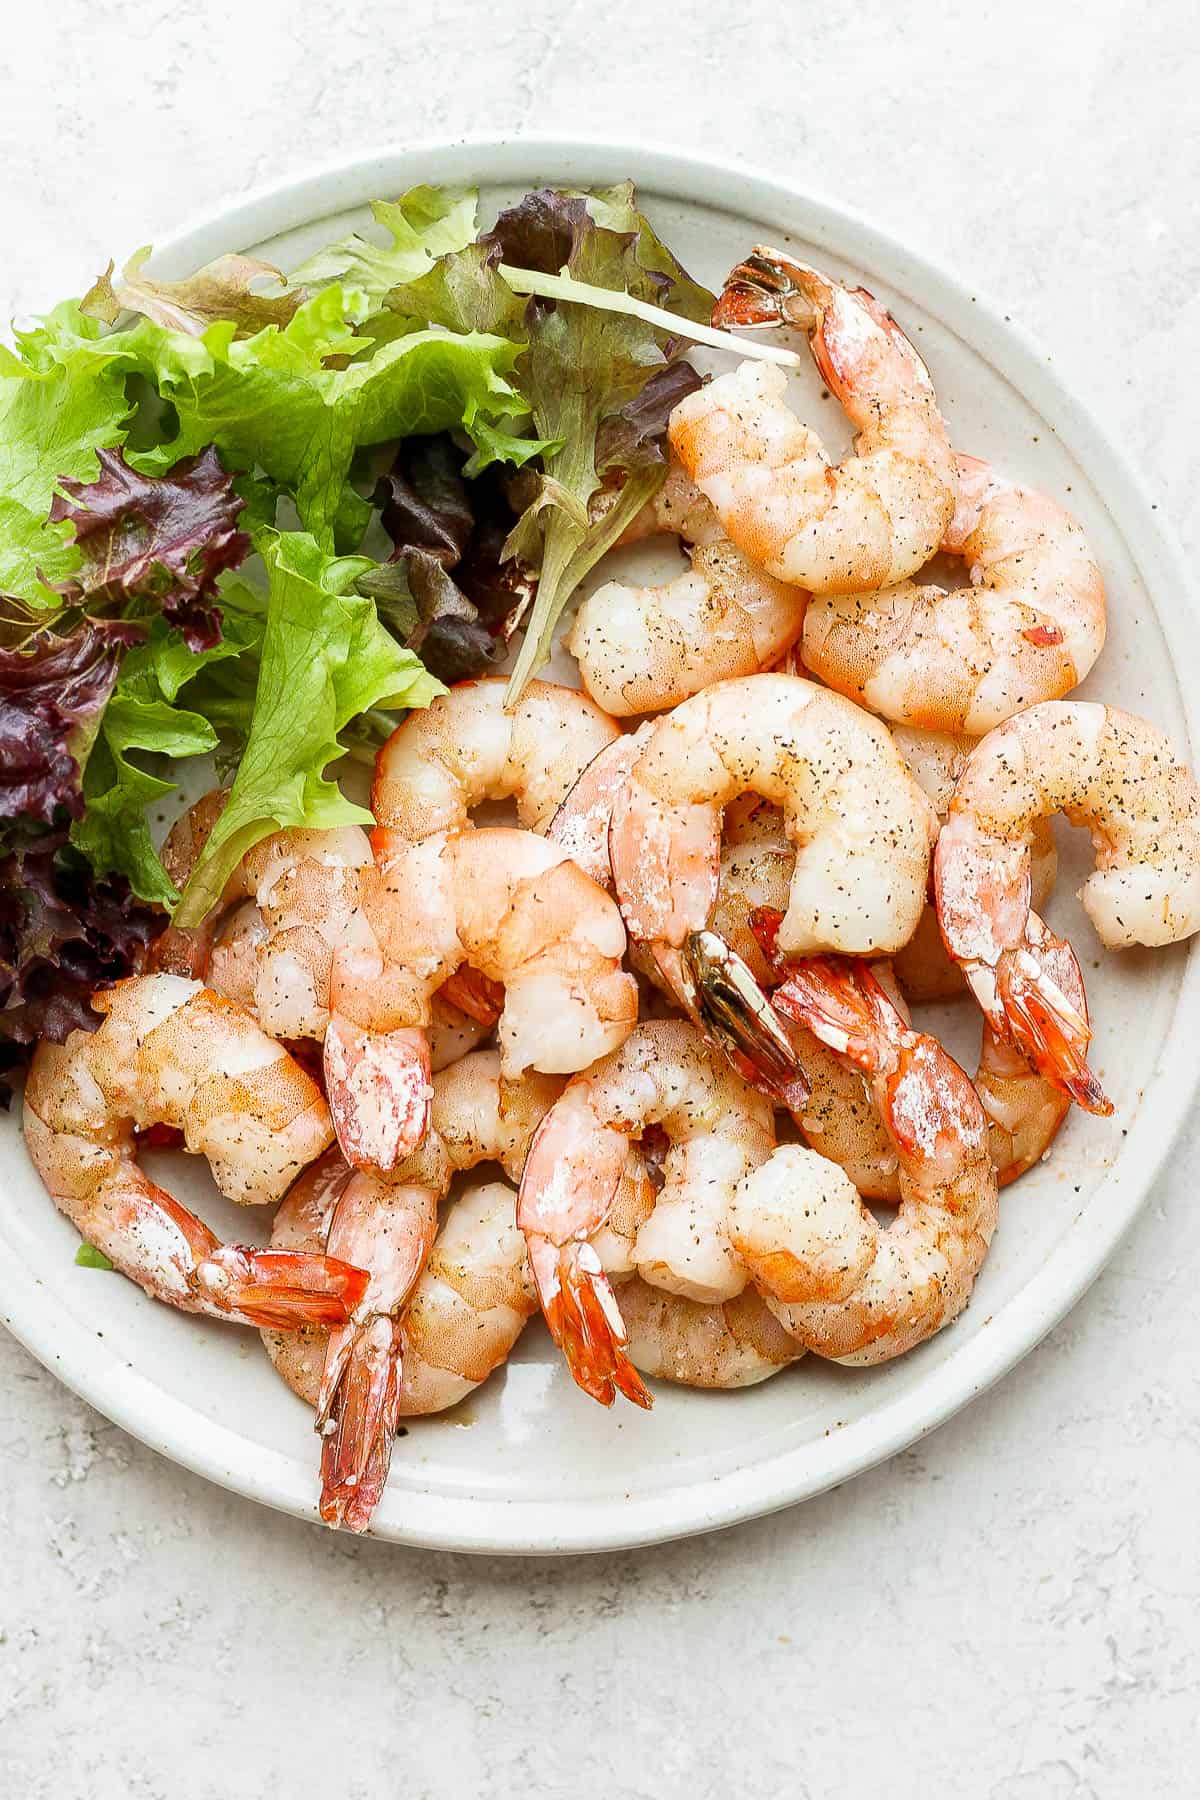 Smoked shrimp on a plate with a side salad.